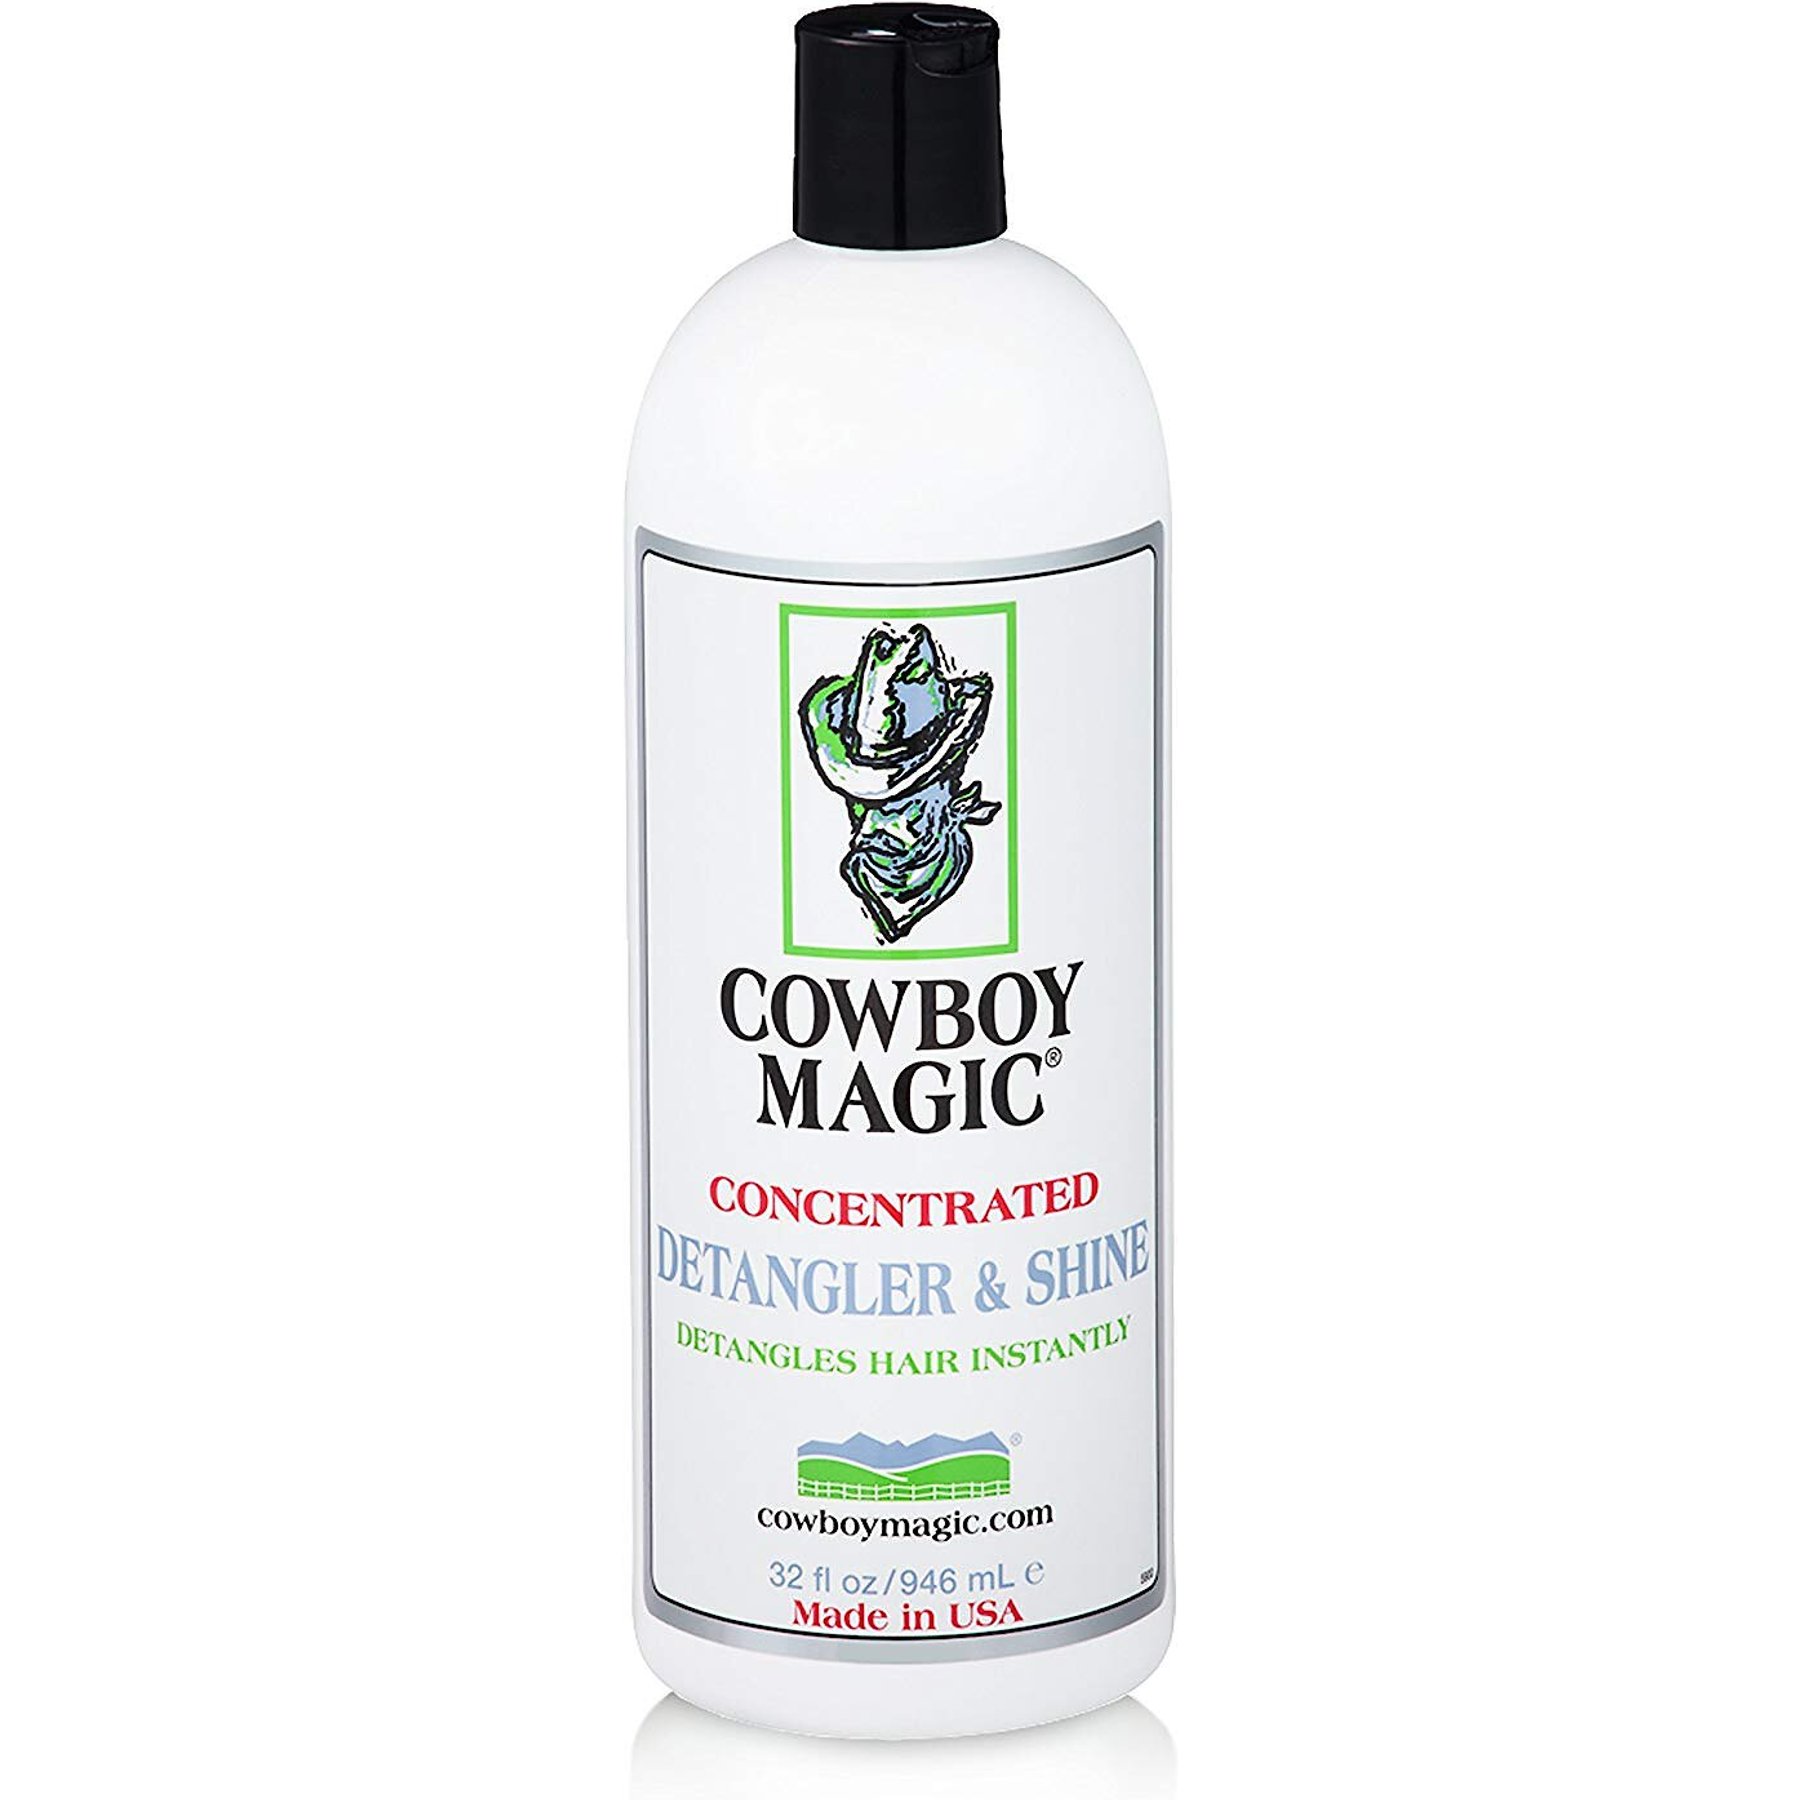 Cowboy Magic Grooming Kit Gift Set - 606786750292 - Care Products 